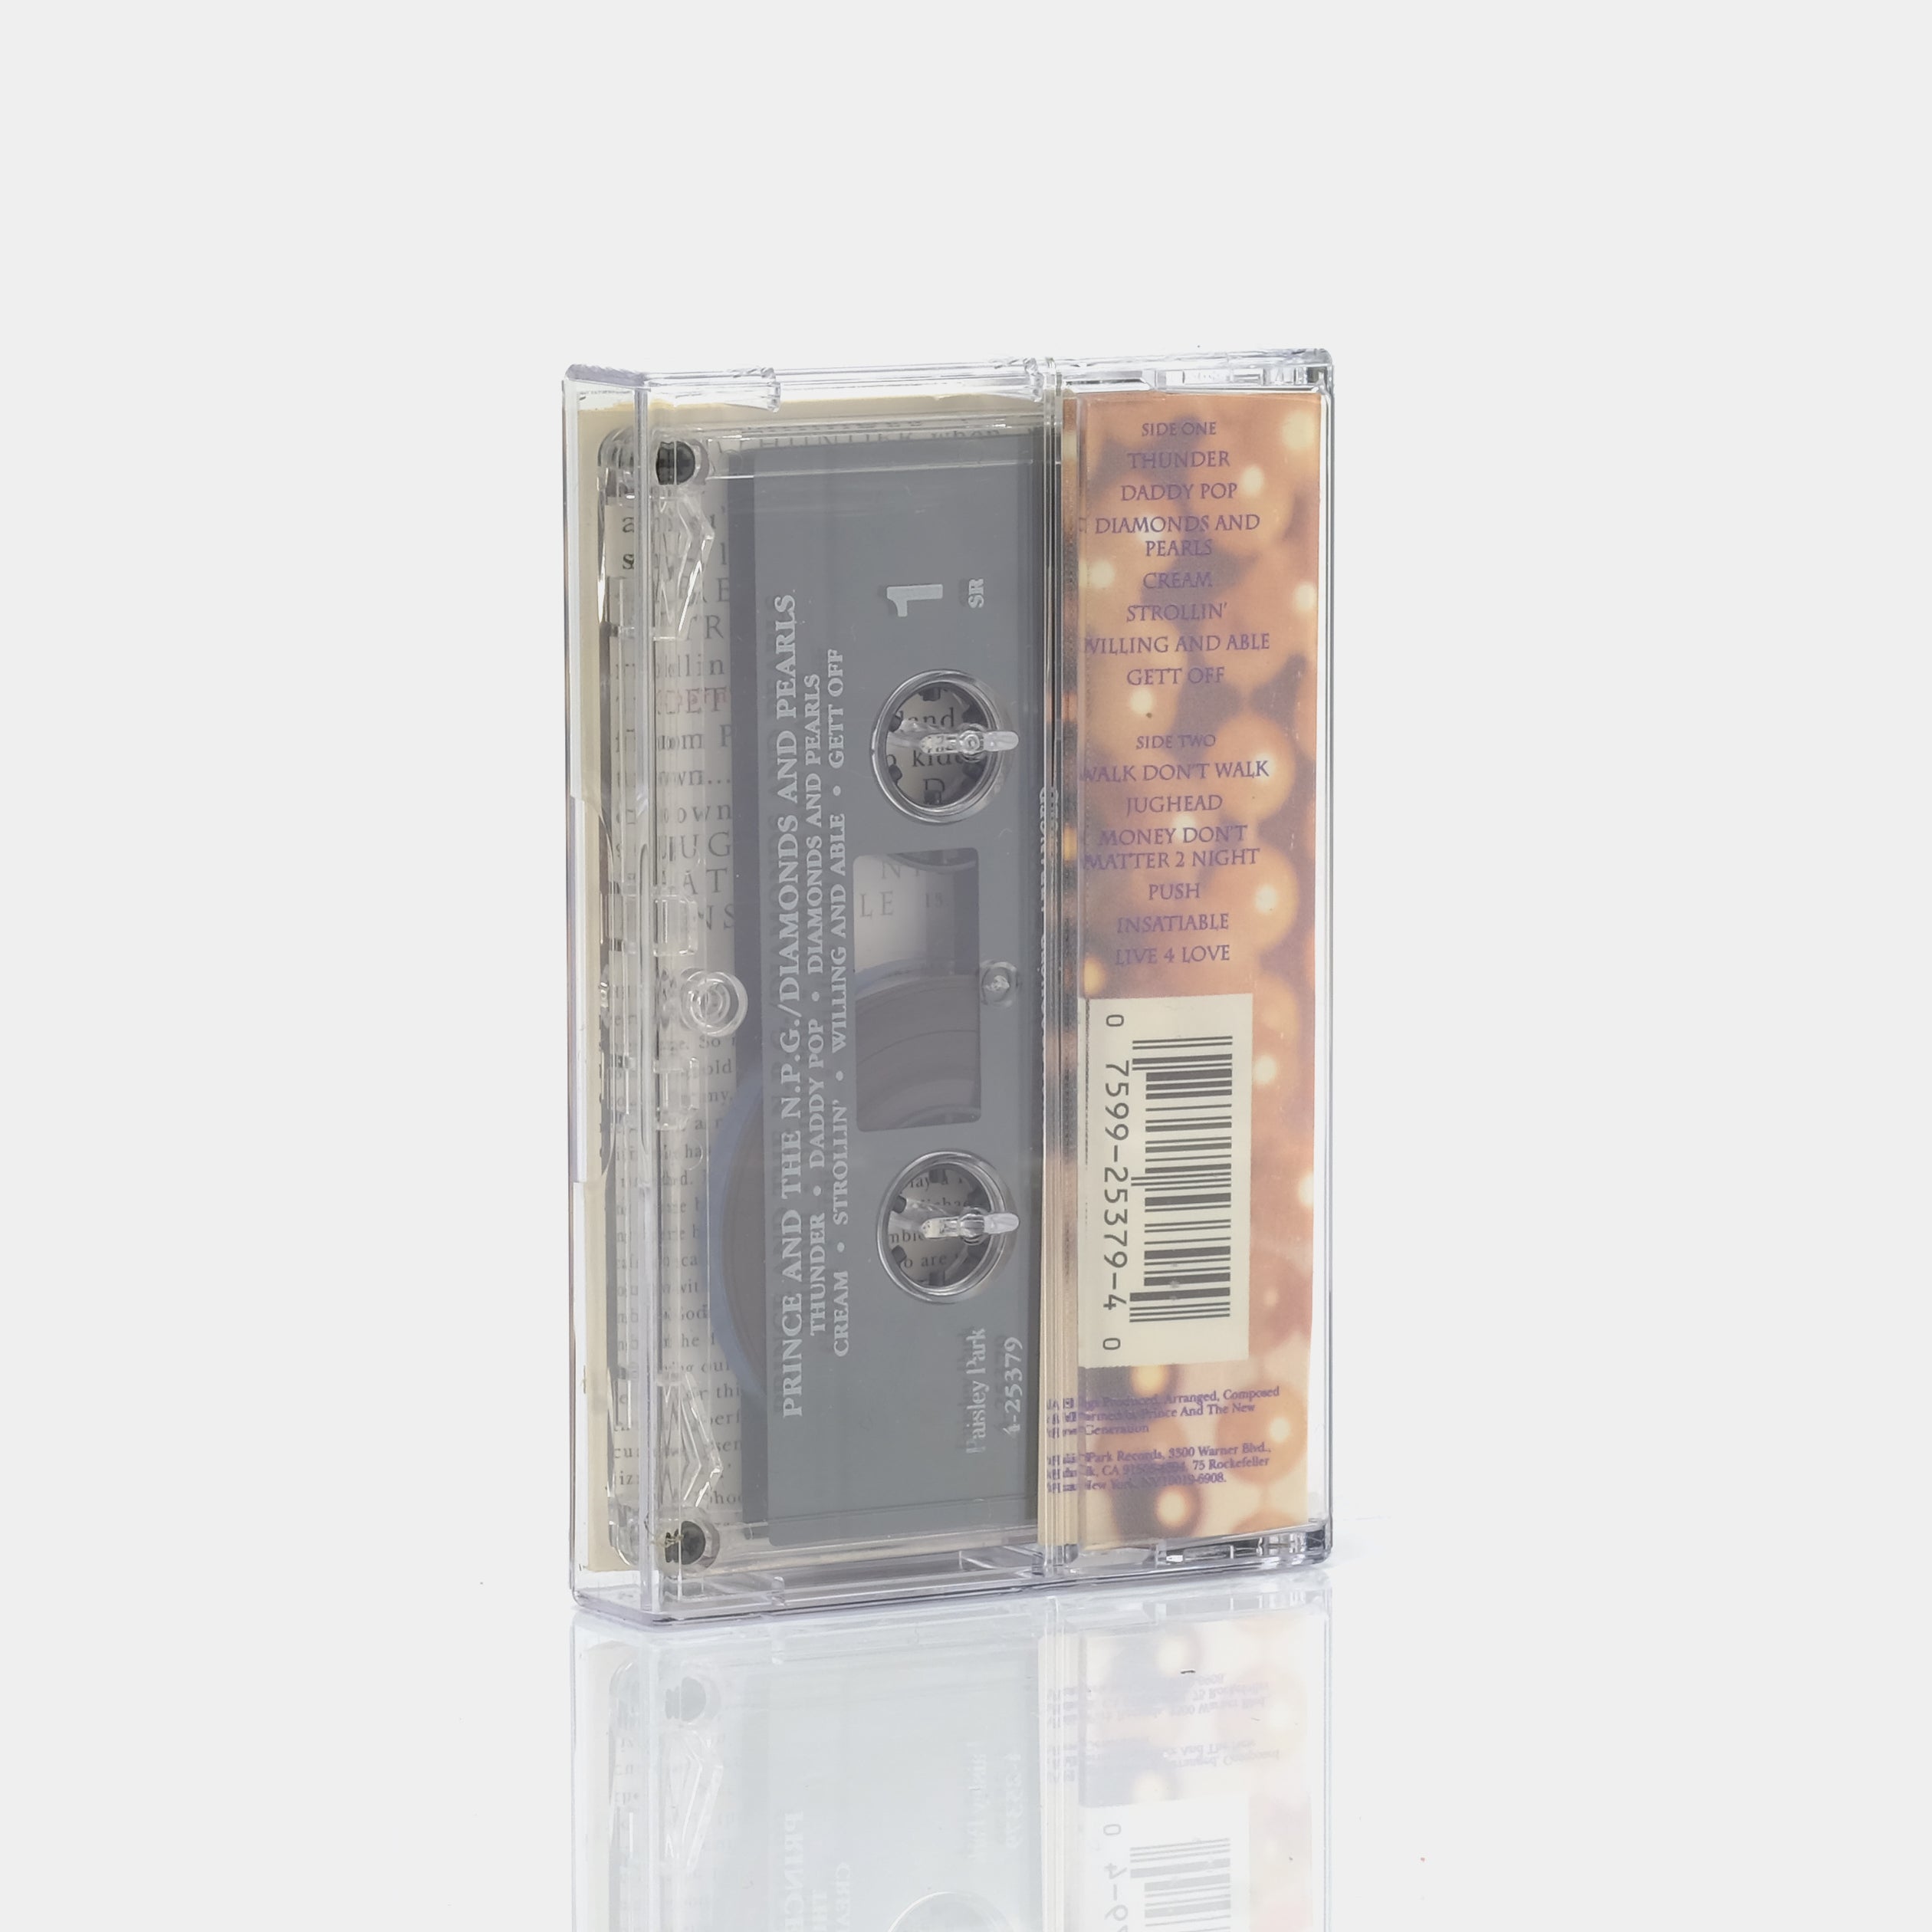 Prince & The New Power Generation - Diamonds And Pearls Cassette Tape